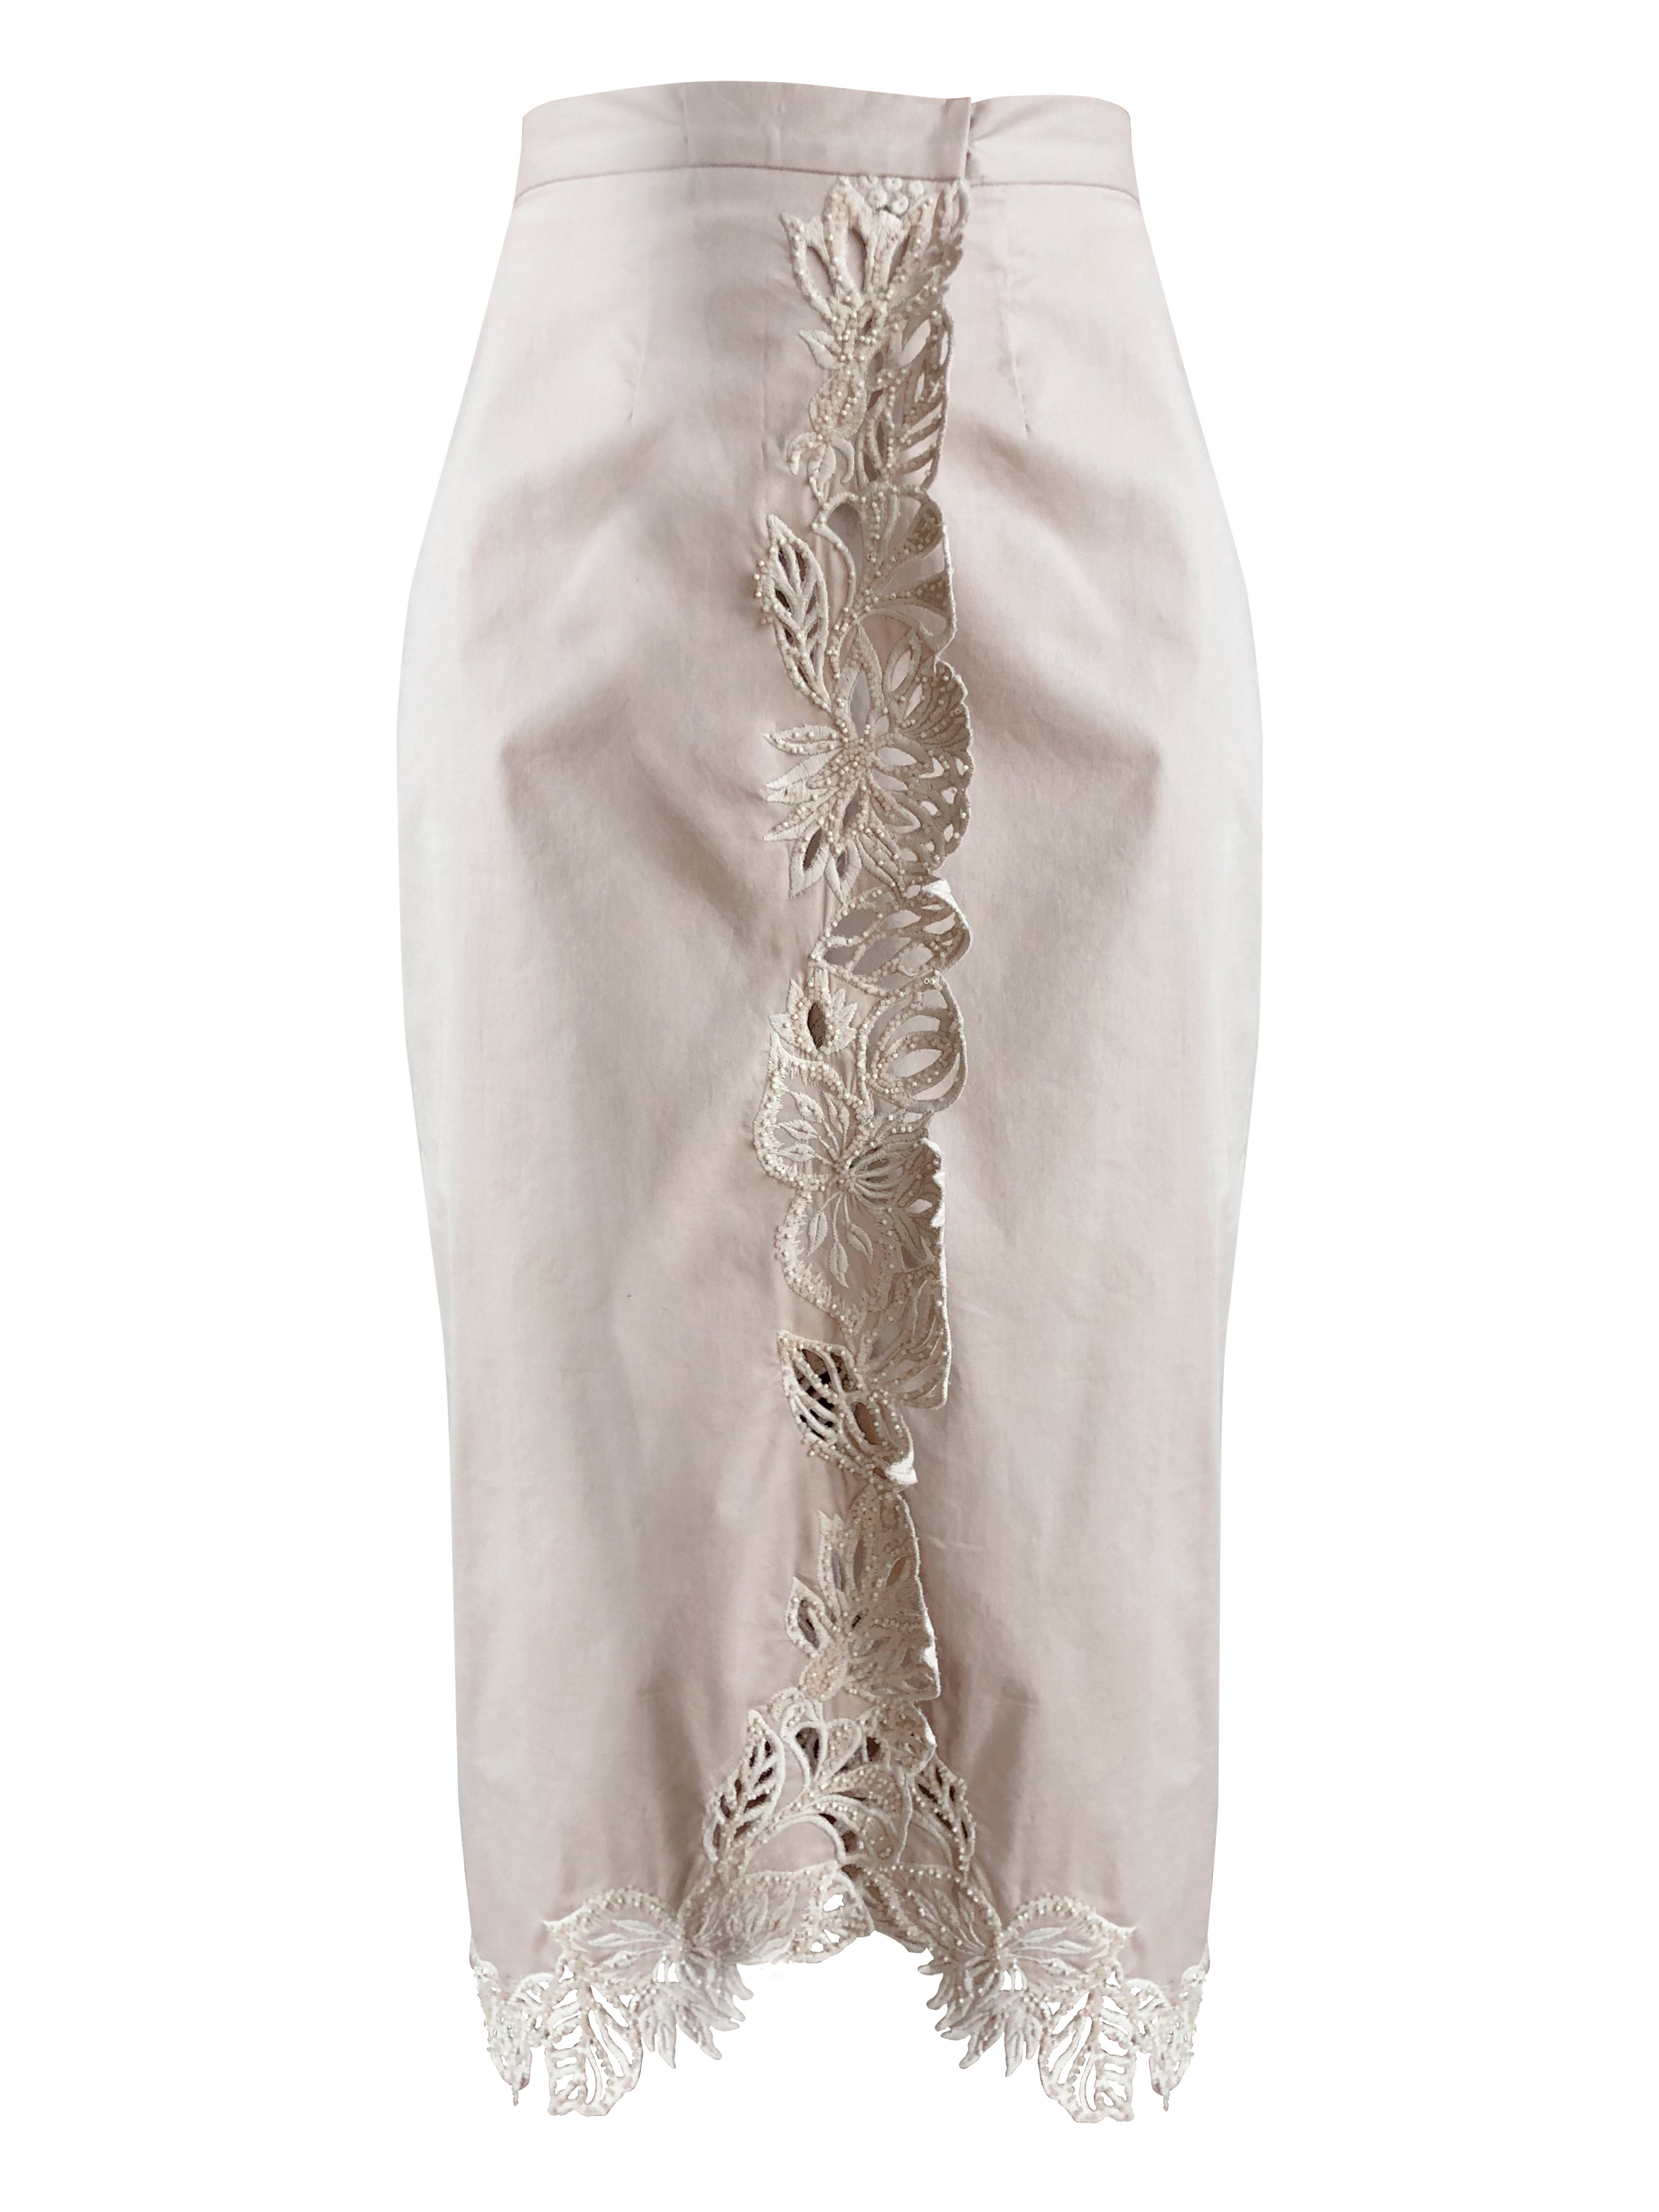 Wrapped skirt decorated with lace and beads